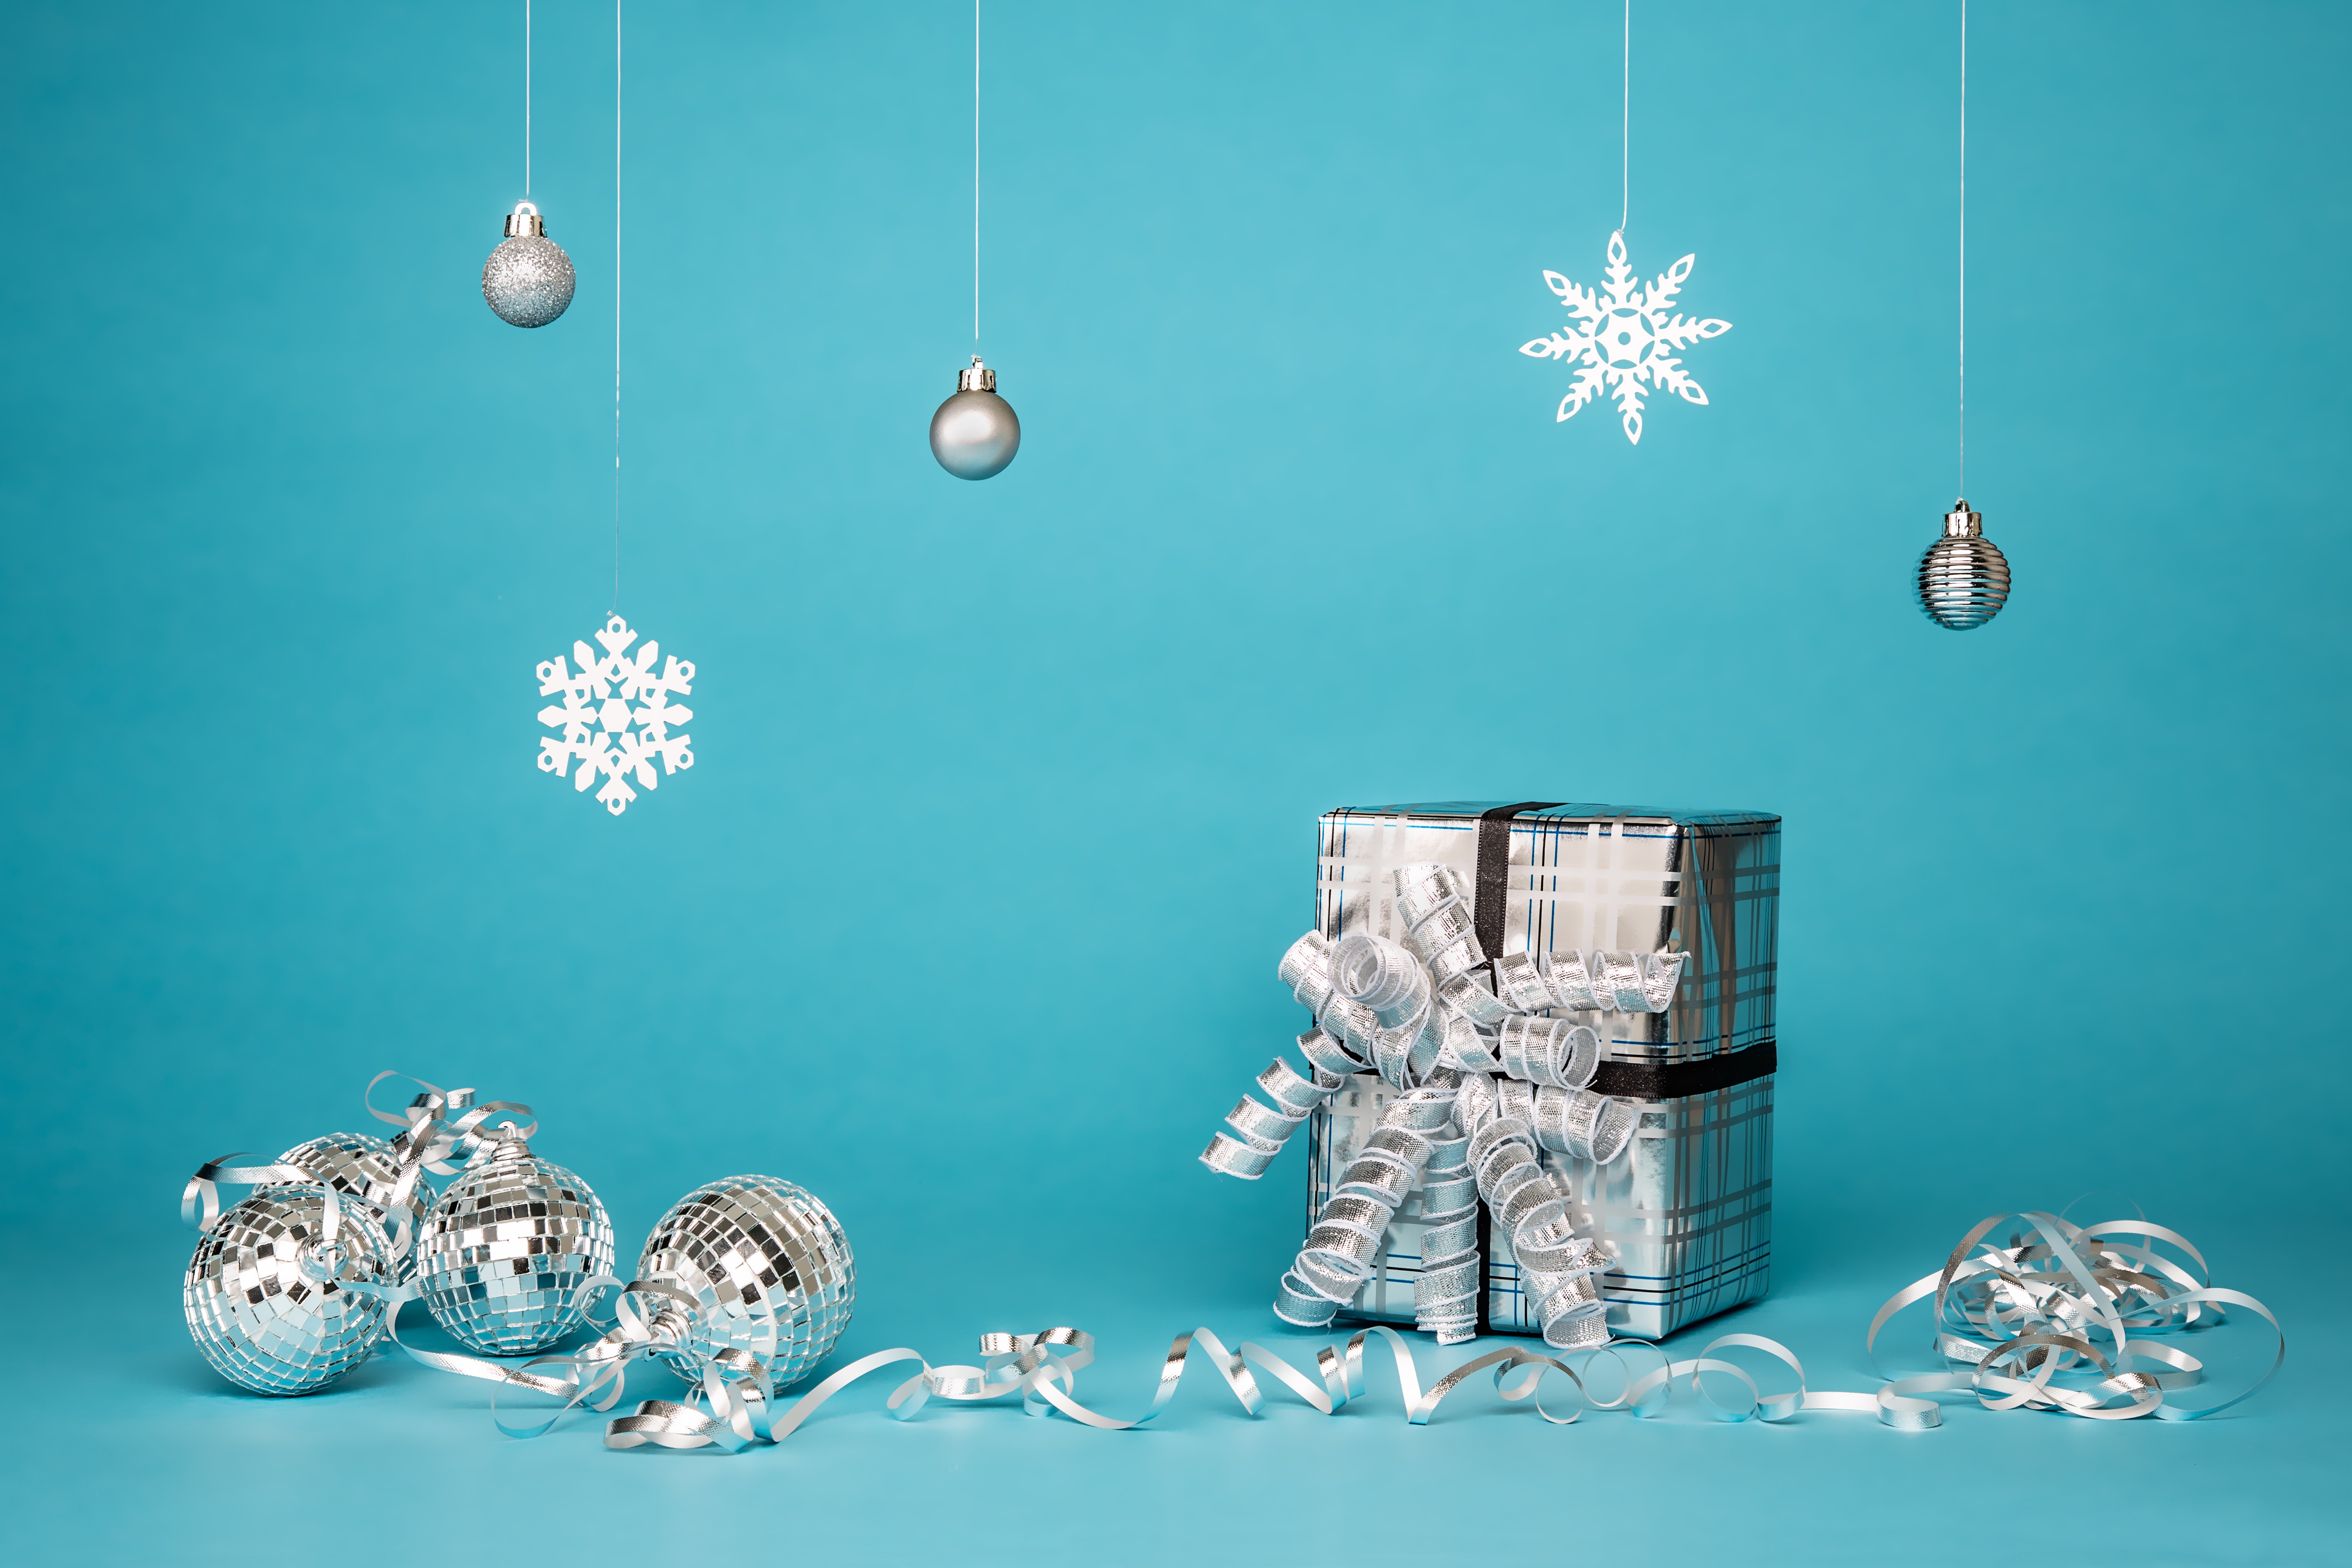 White gifts & balls on blue background